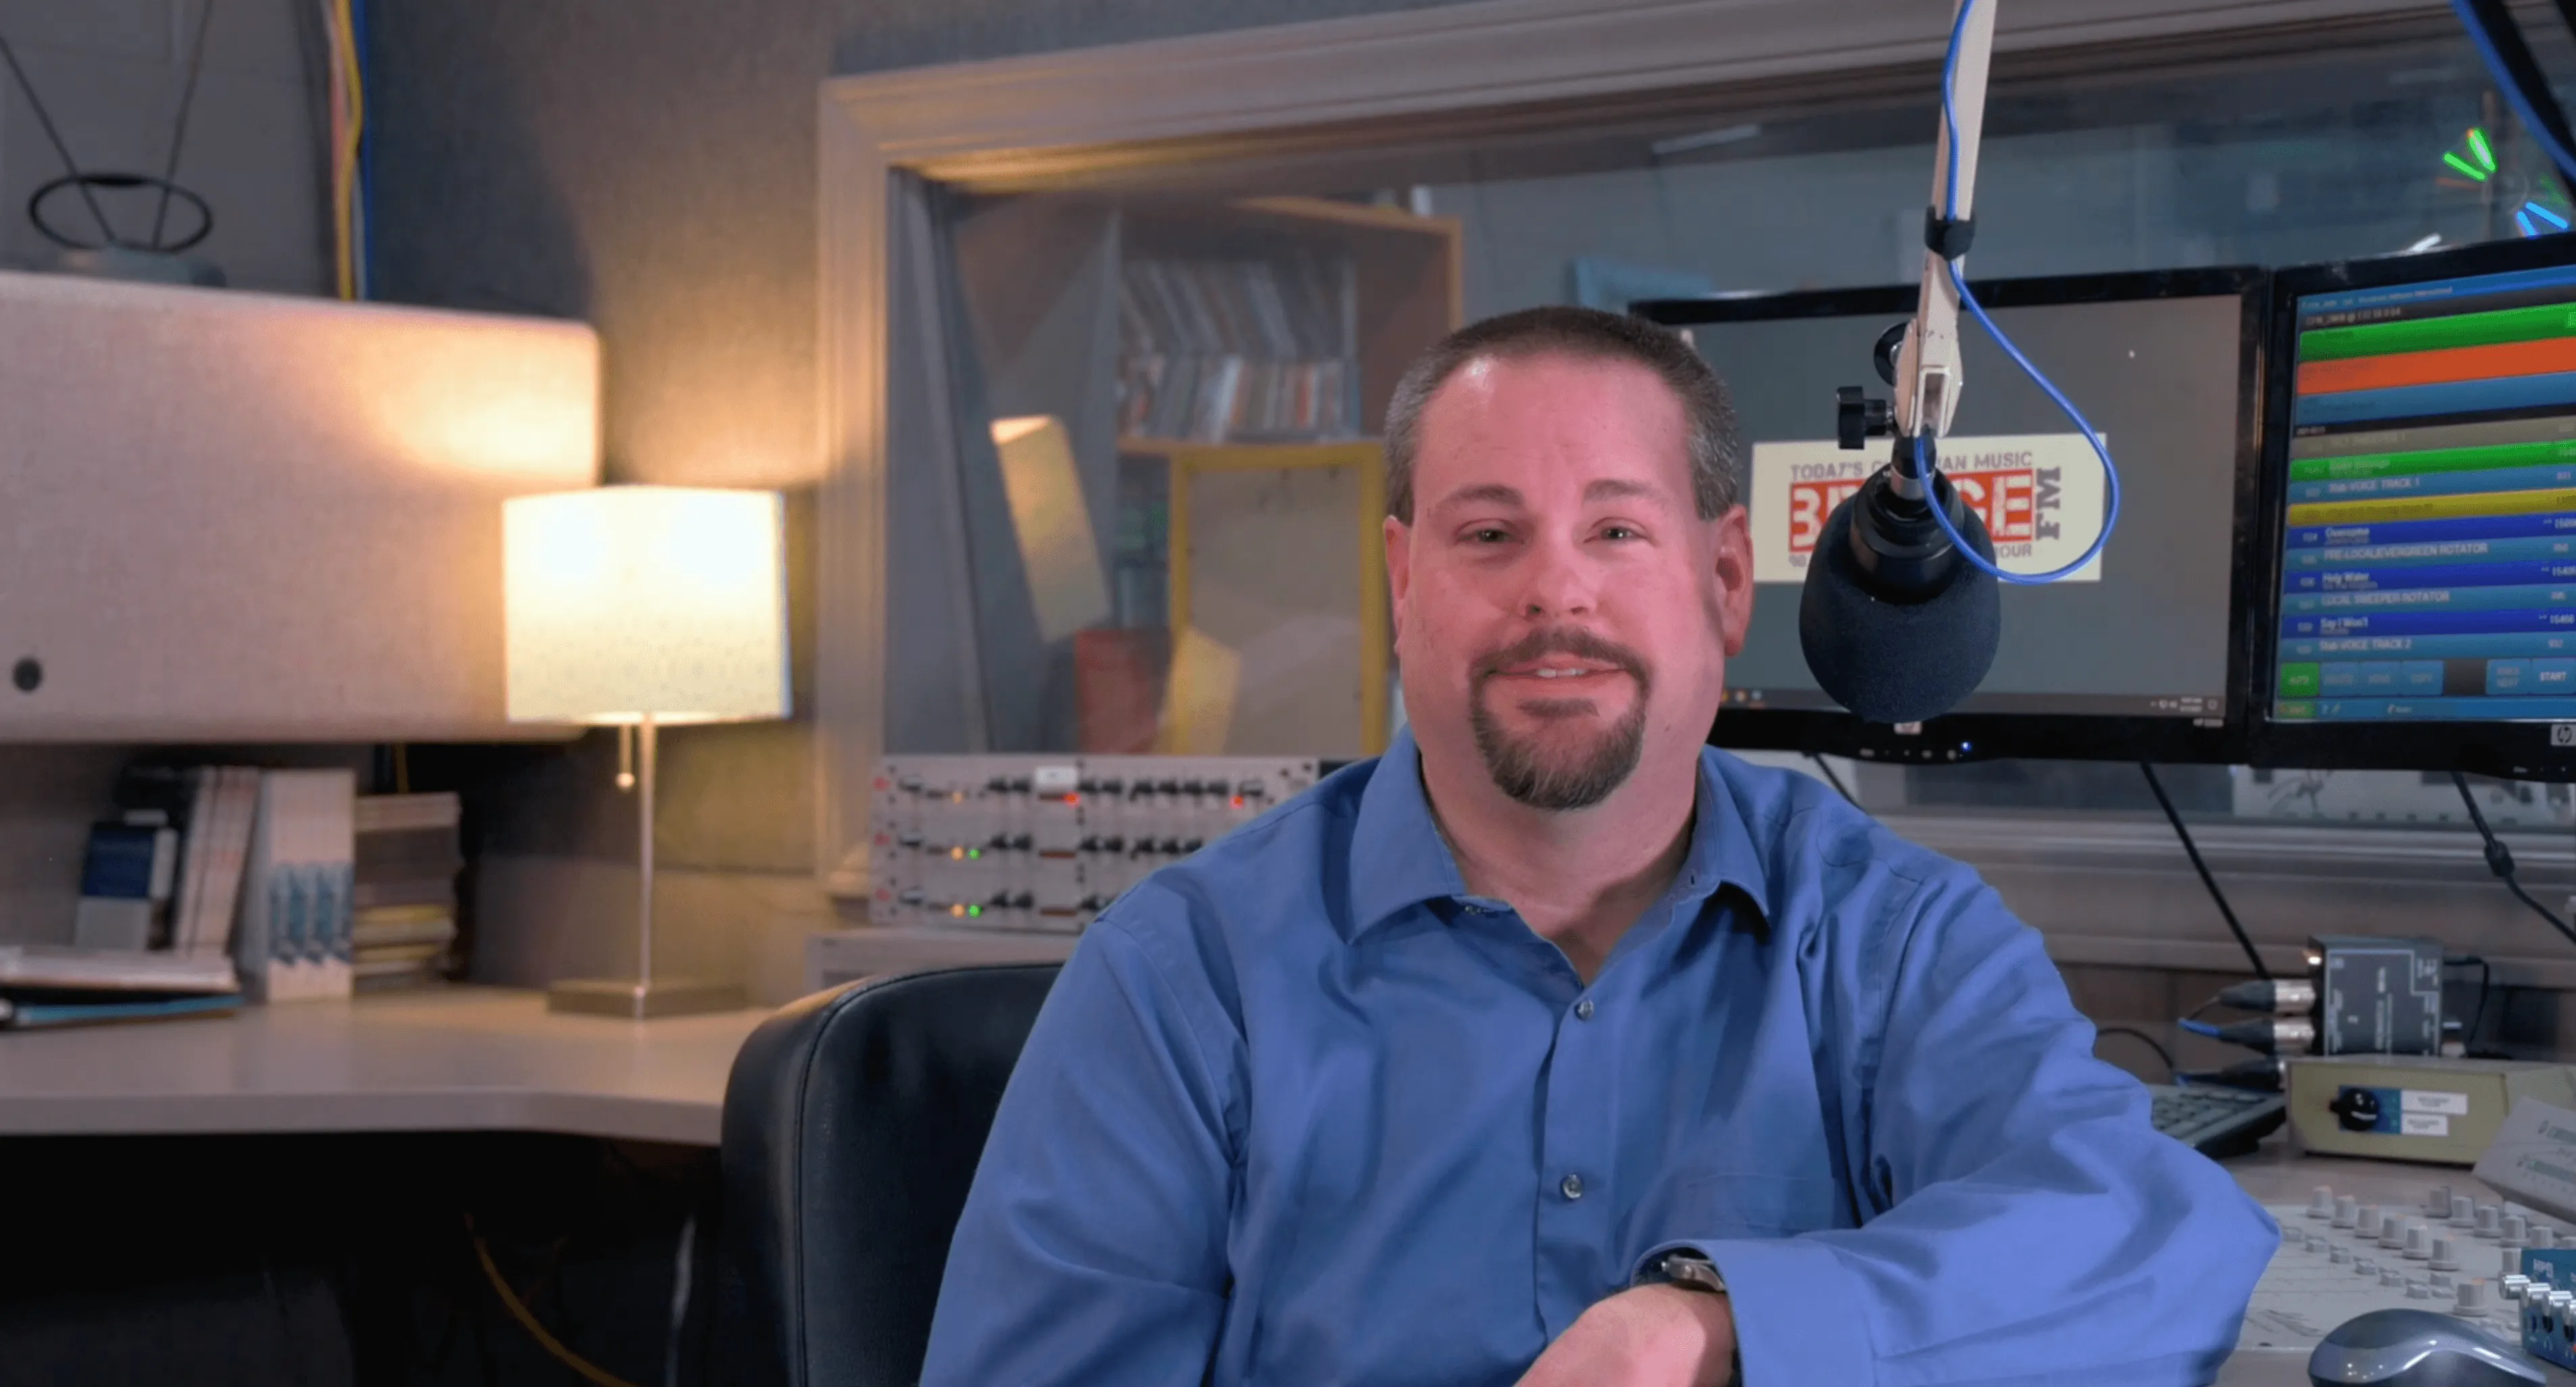 Man in blue shirt smiling at camera in a radio station studio with microphone and control board equipment in the background.